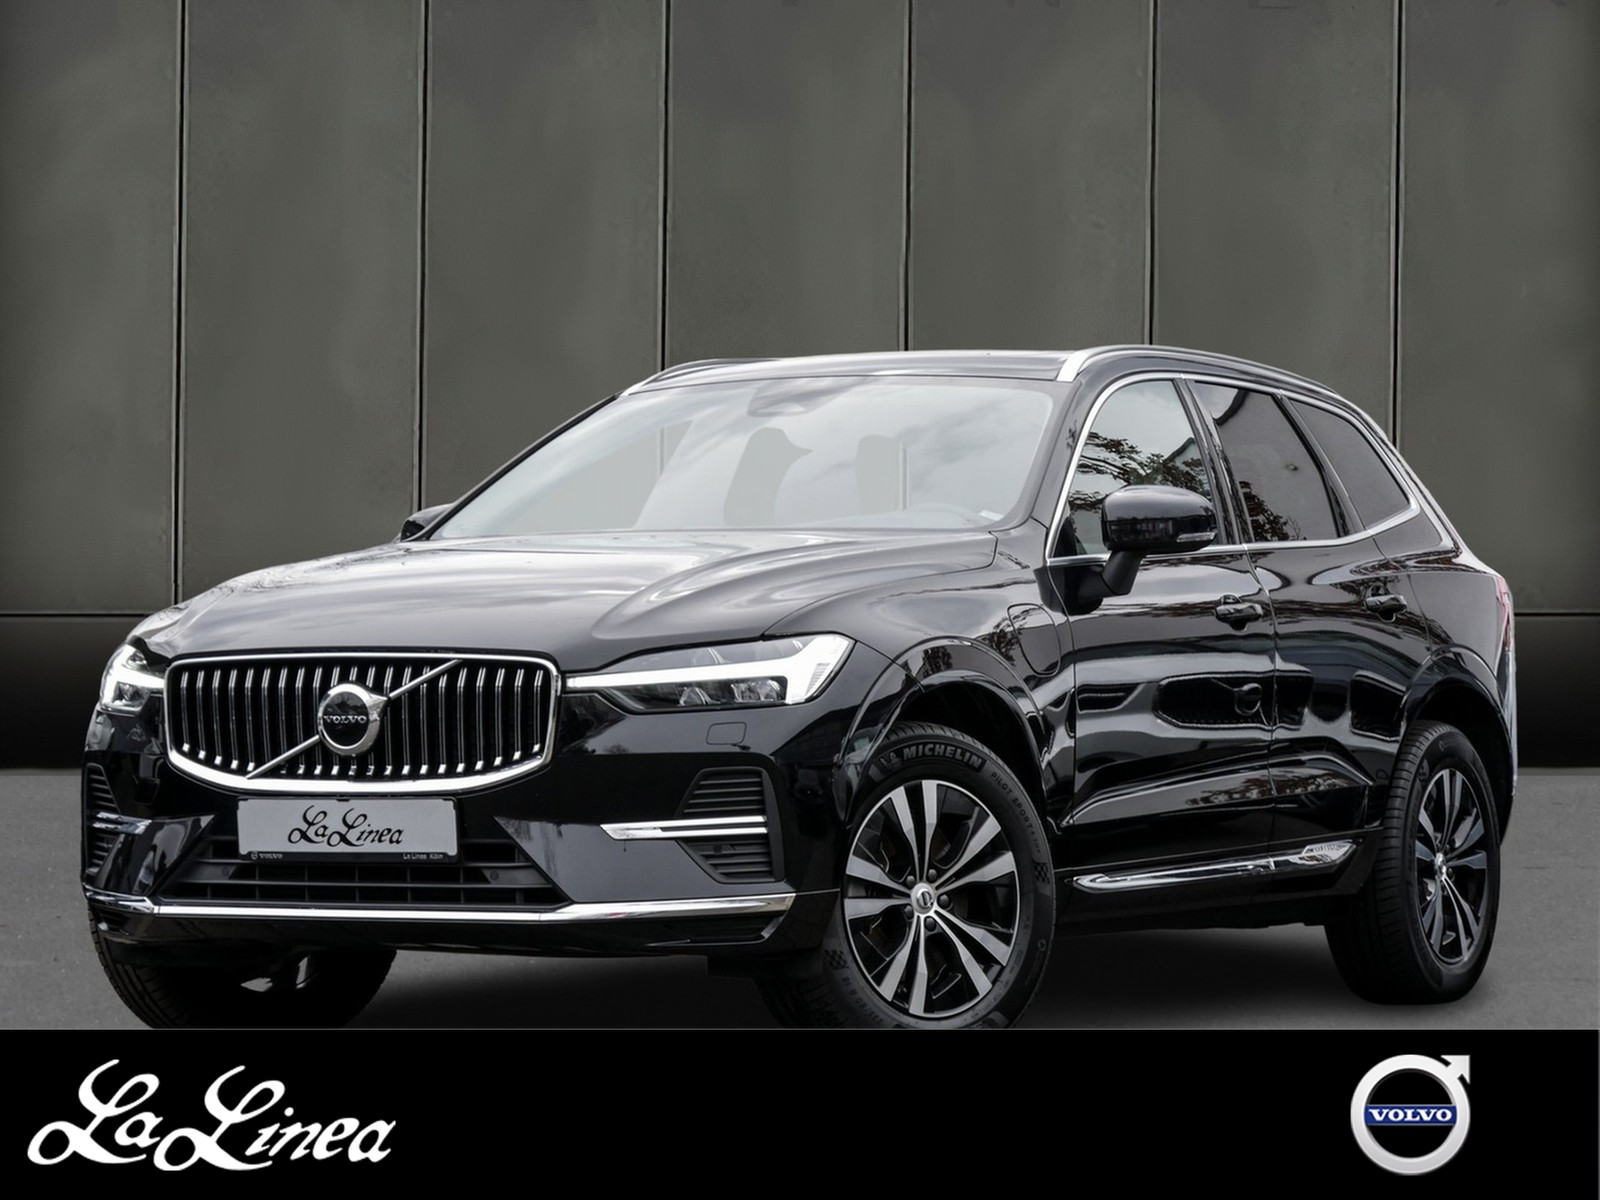 Volvo XC60 5.5 T6 Recharge AWD Inscription Expression 760 - GOOGLE 2CO²